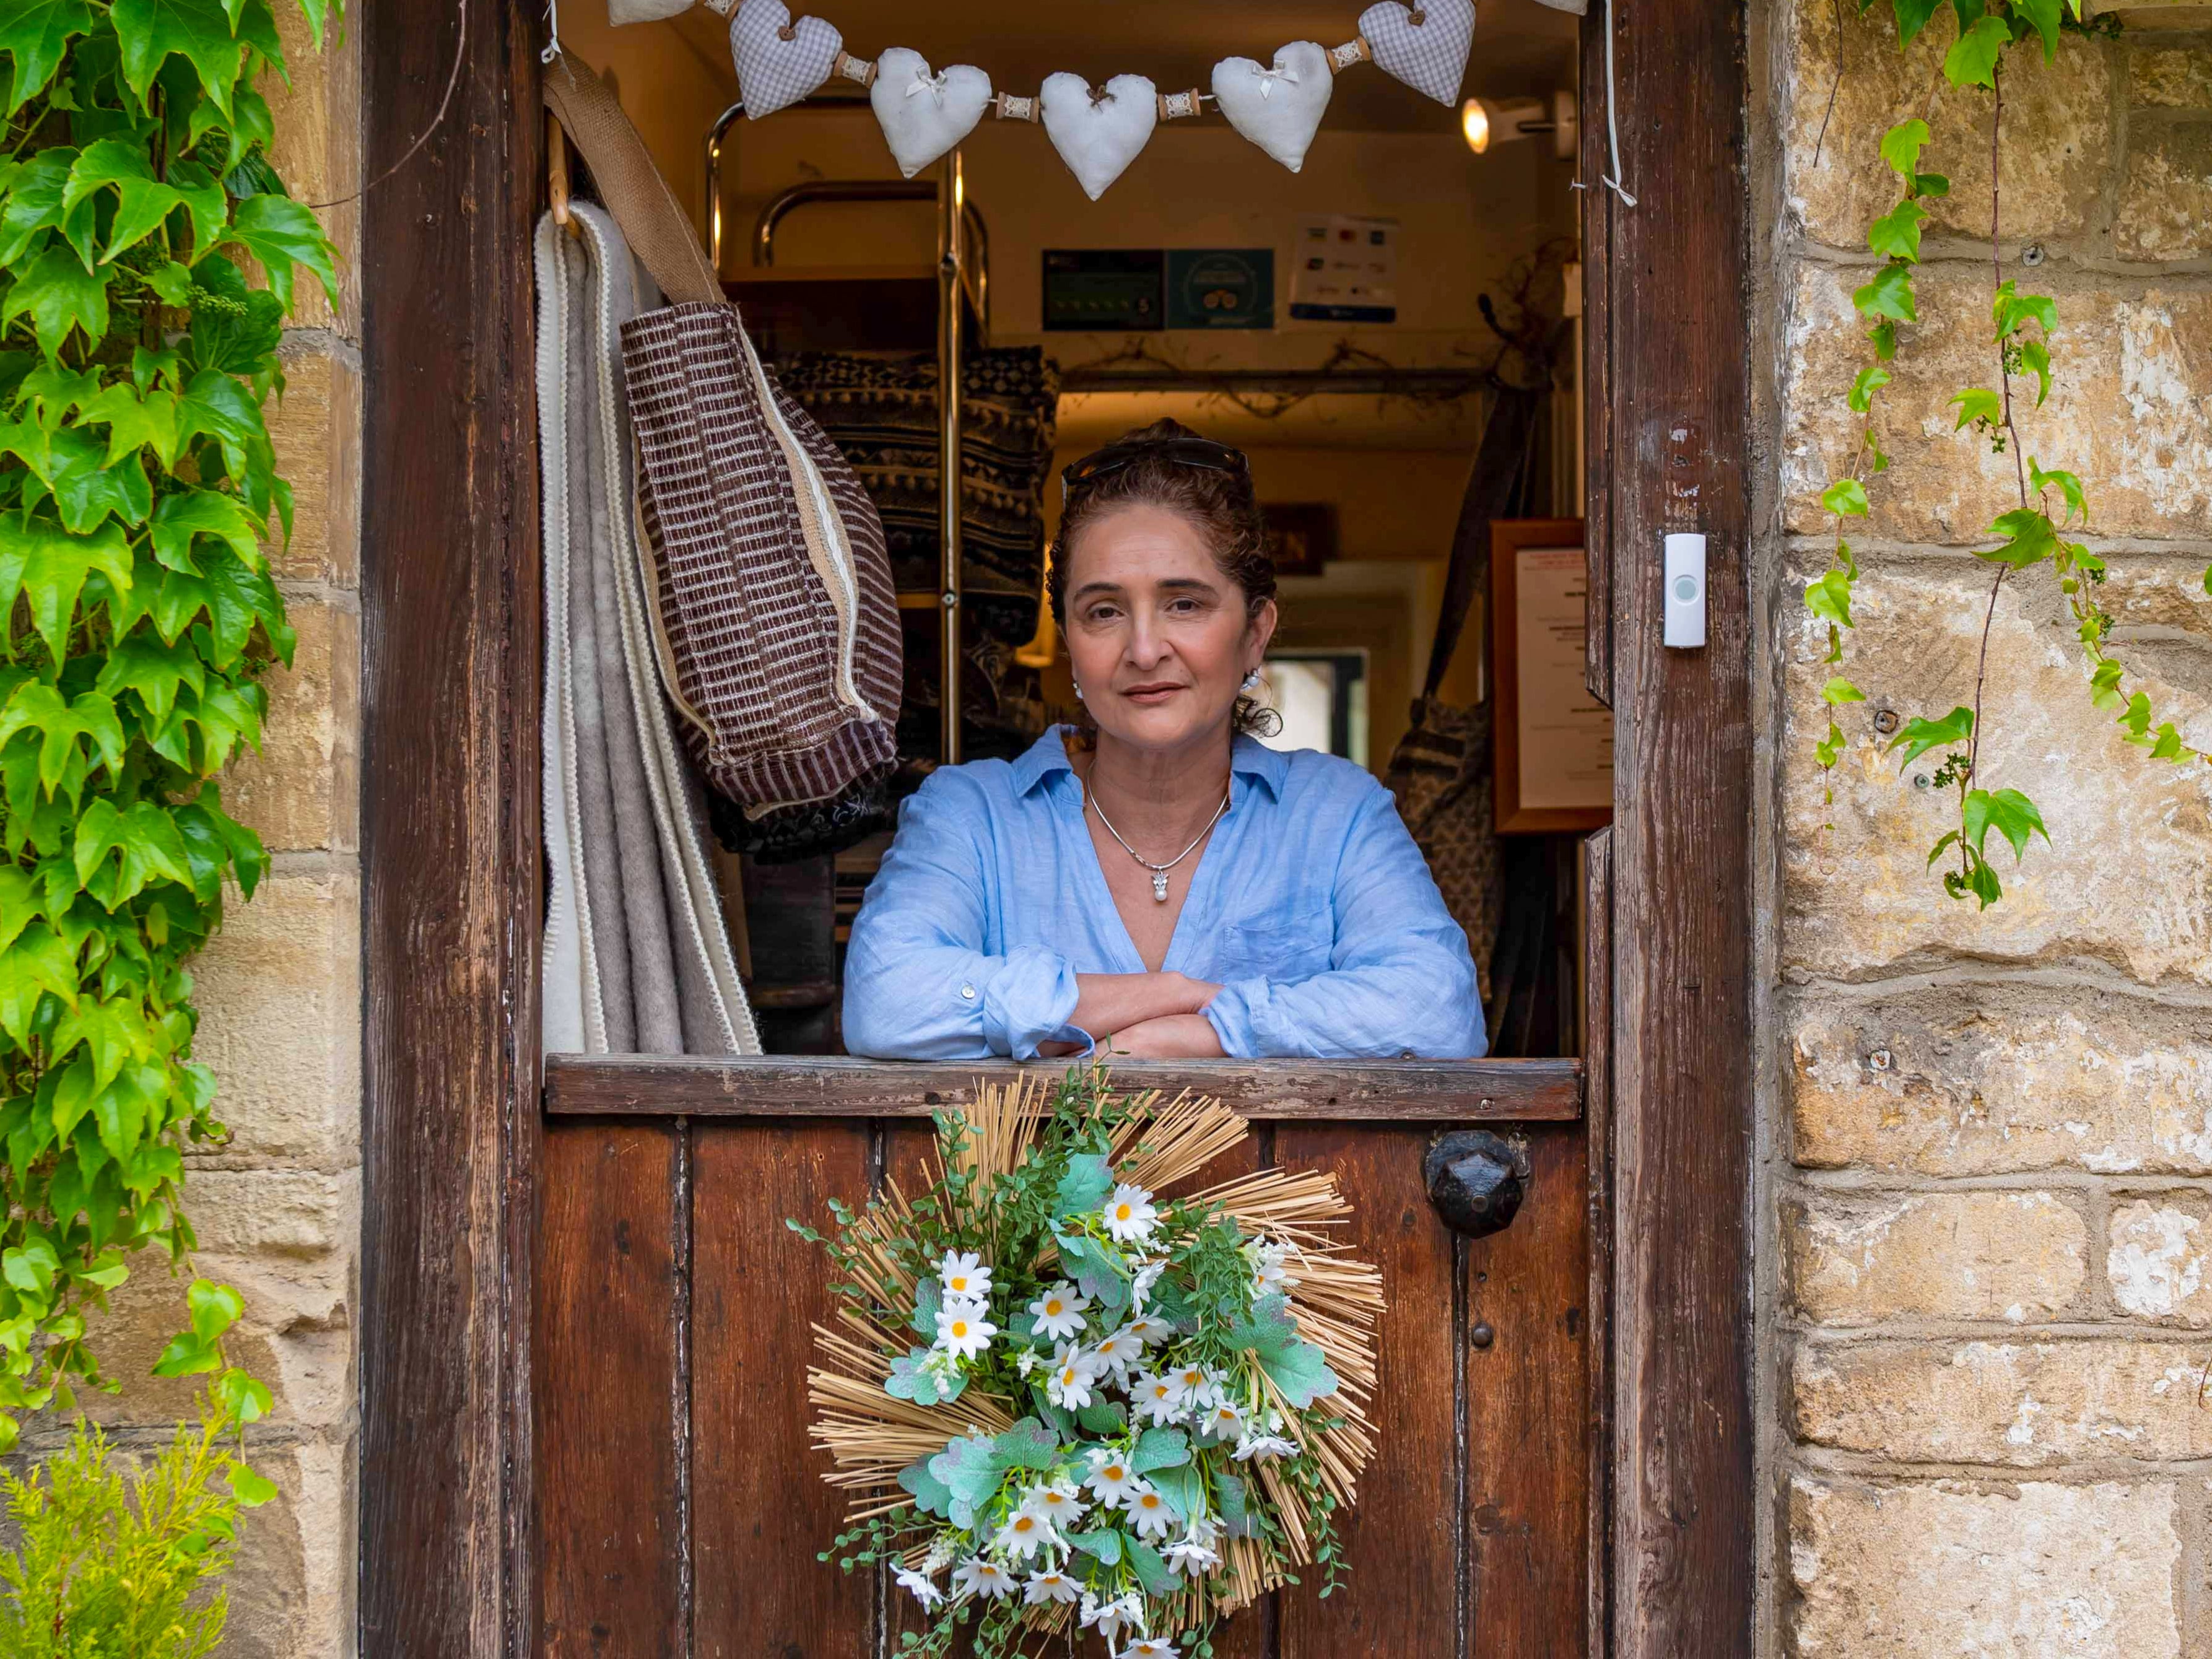 Anna Roberts at her home in Castle Combe